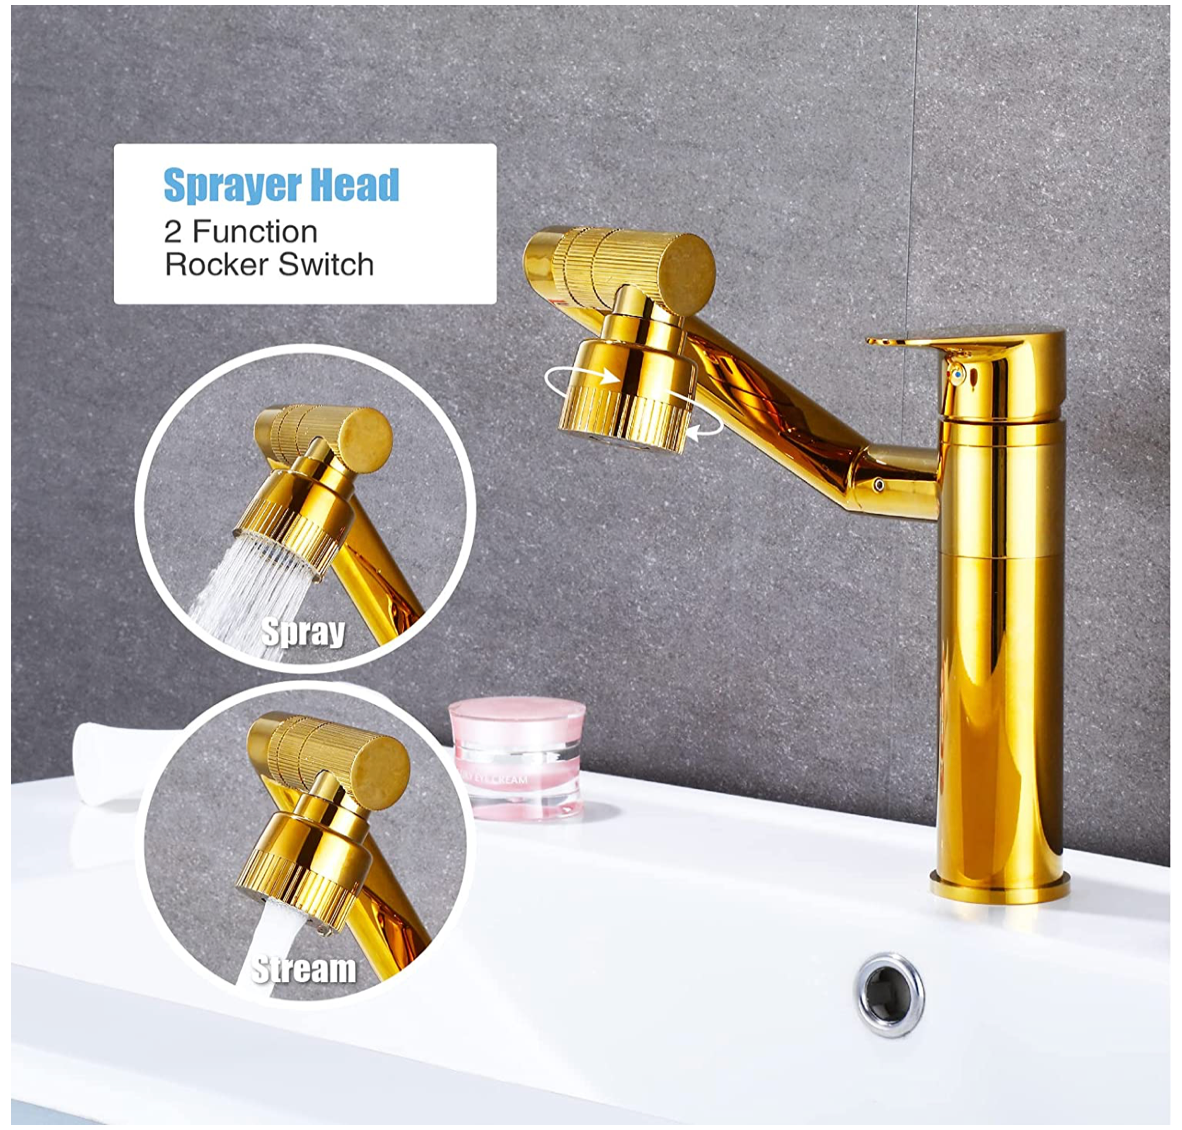 The Swiveling Faucet